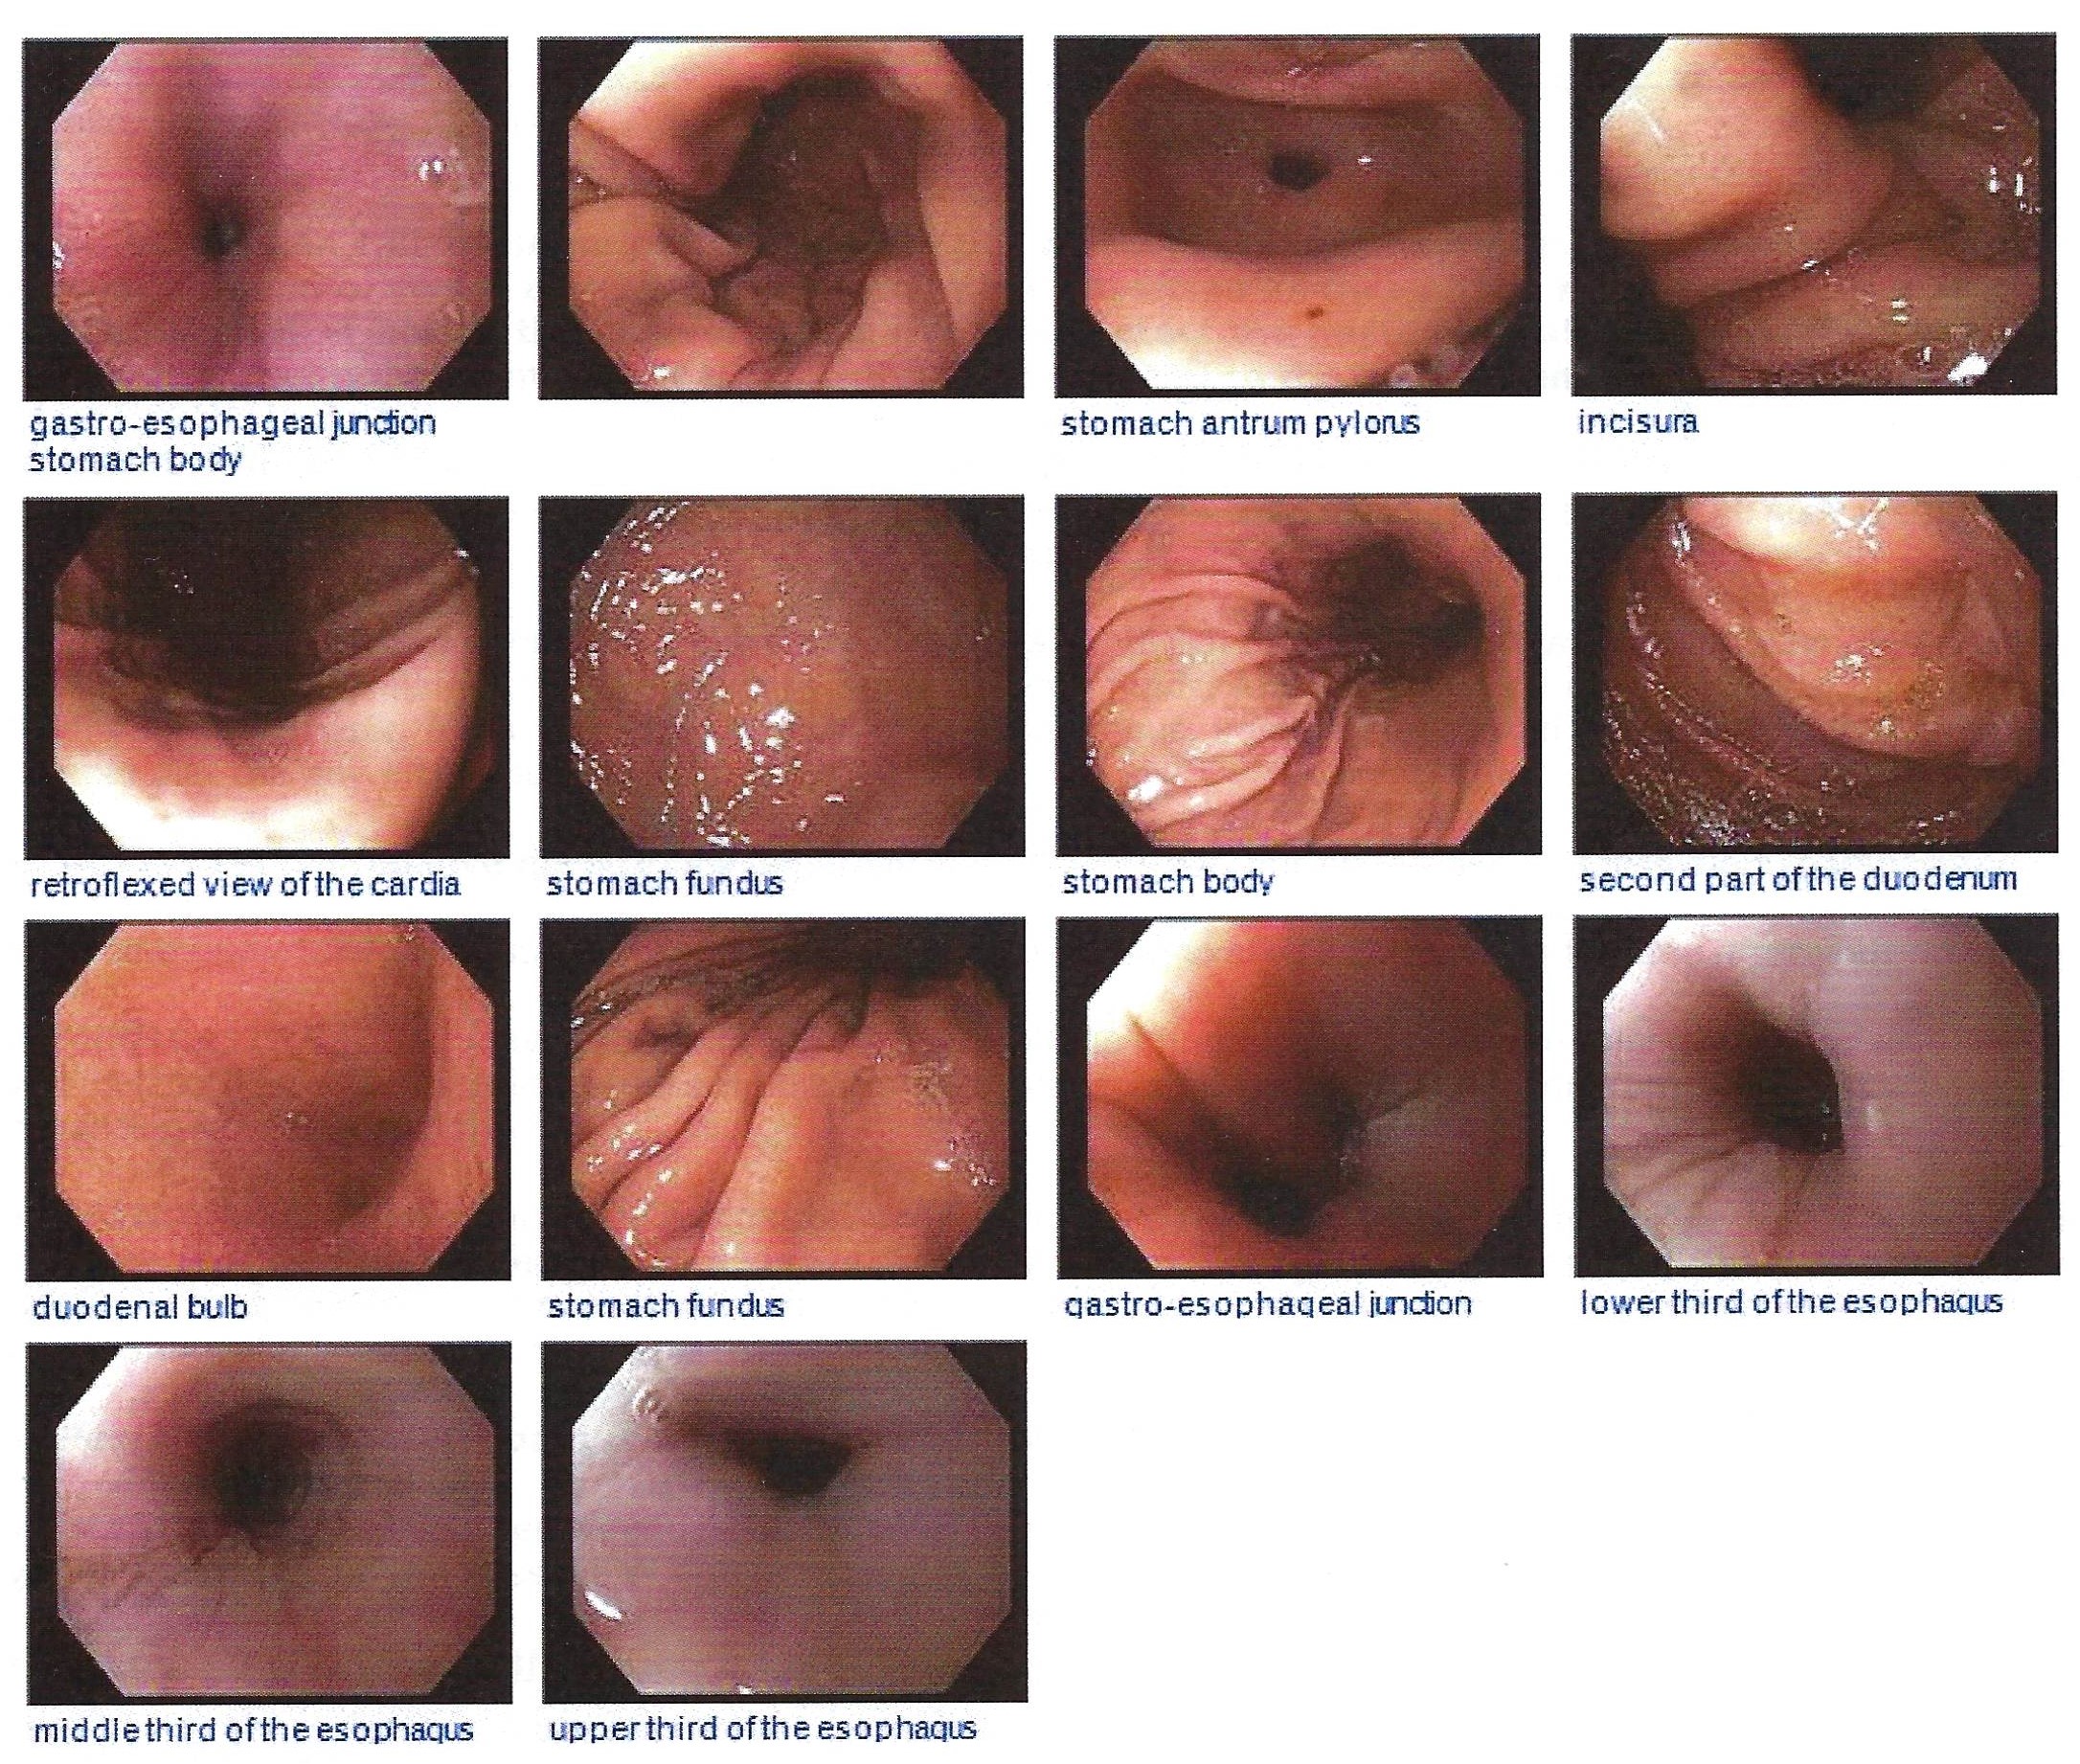 A grid of endoscopy photographs of the esophagus, stomach, and duodenum.